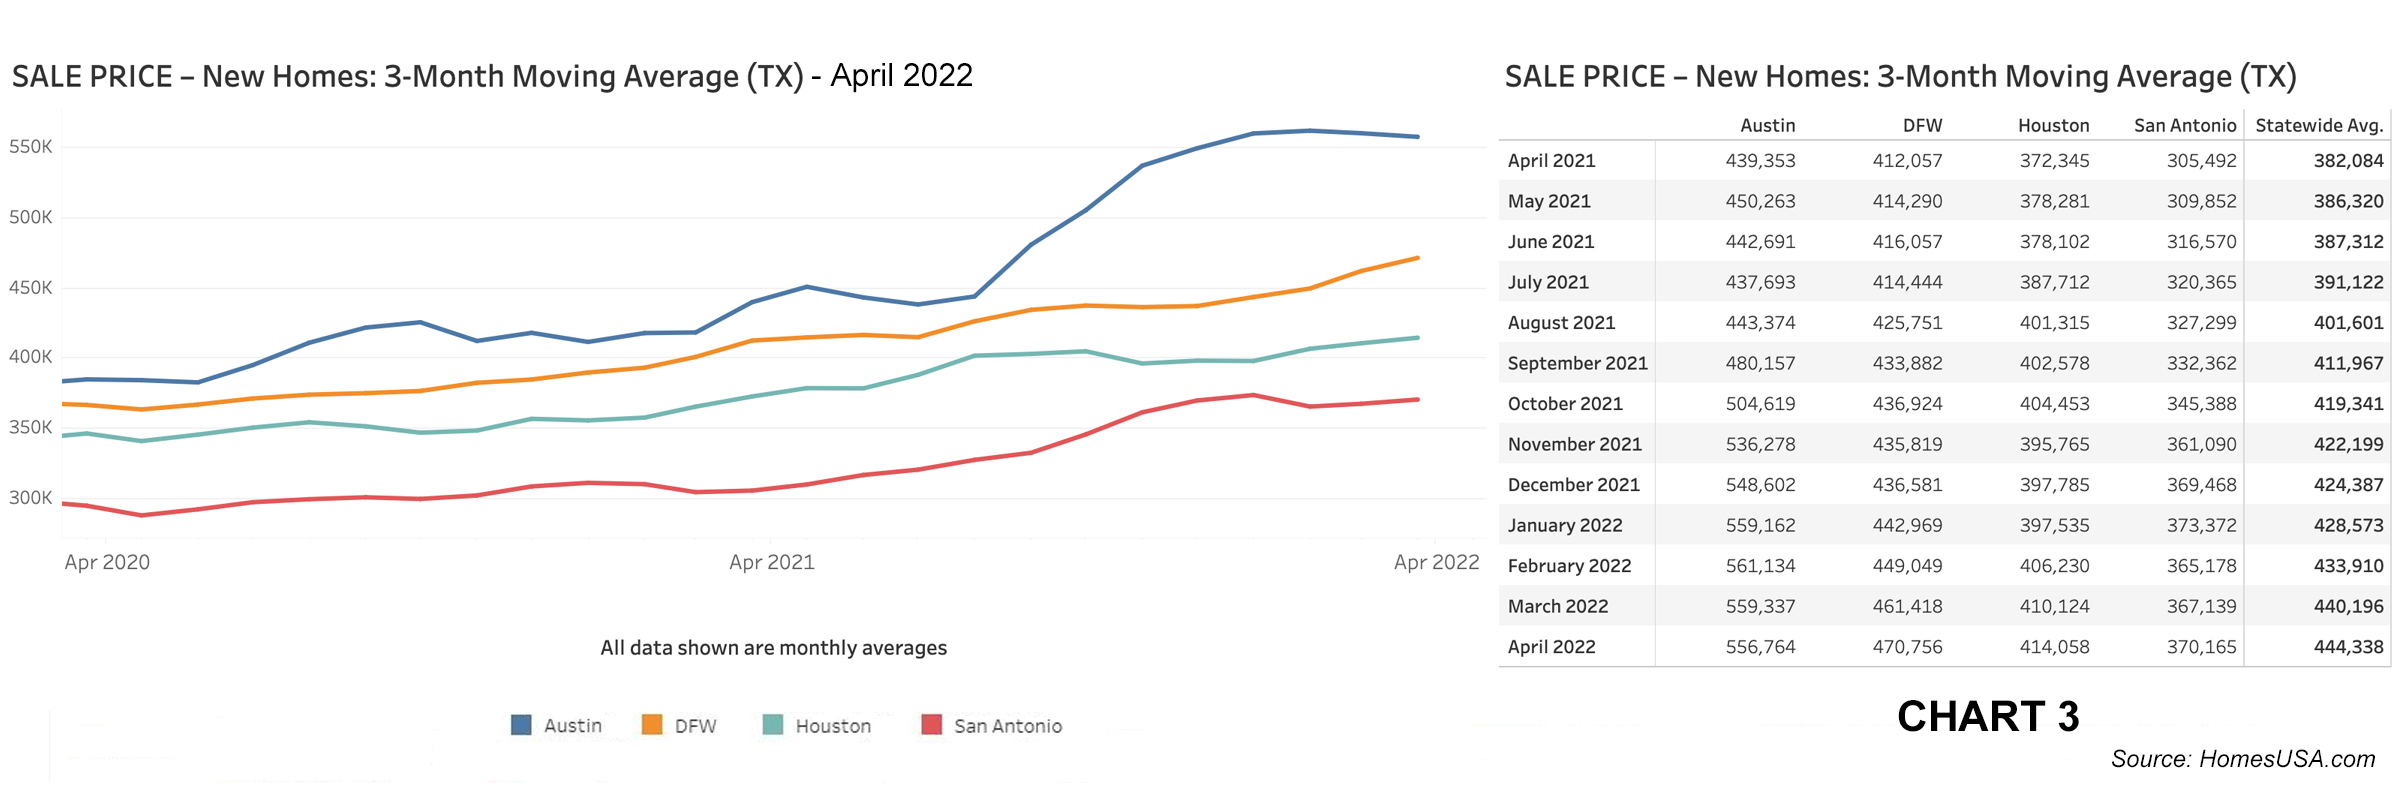 Chart 3: Texas New Home Sales Prices – April 2022